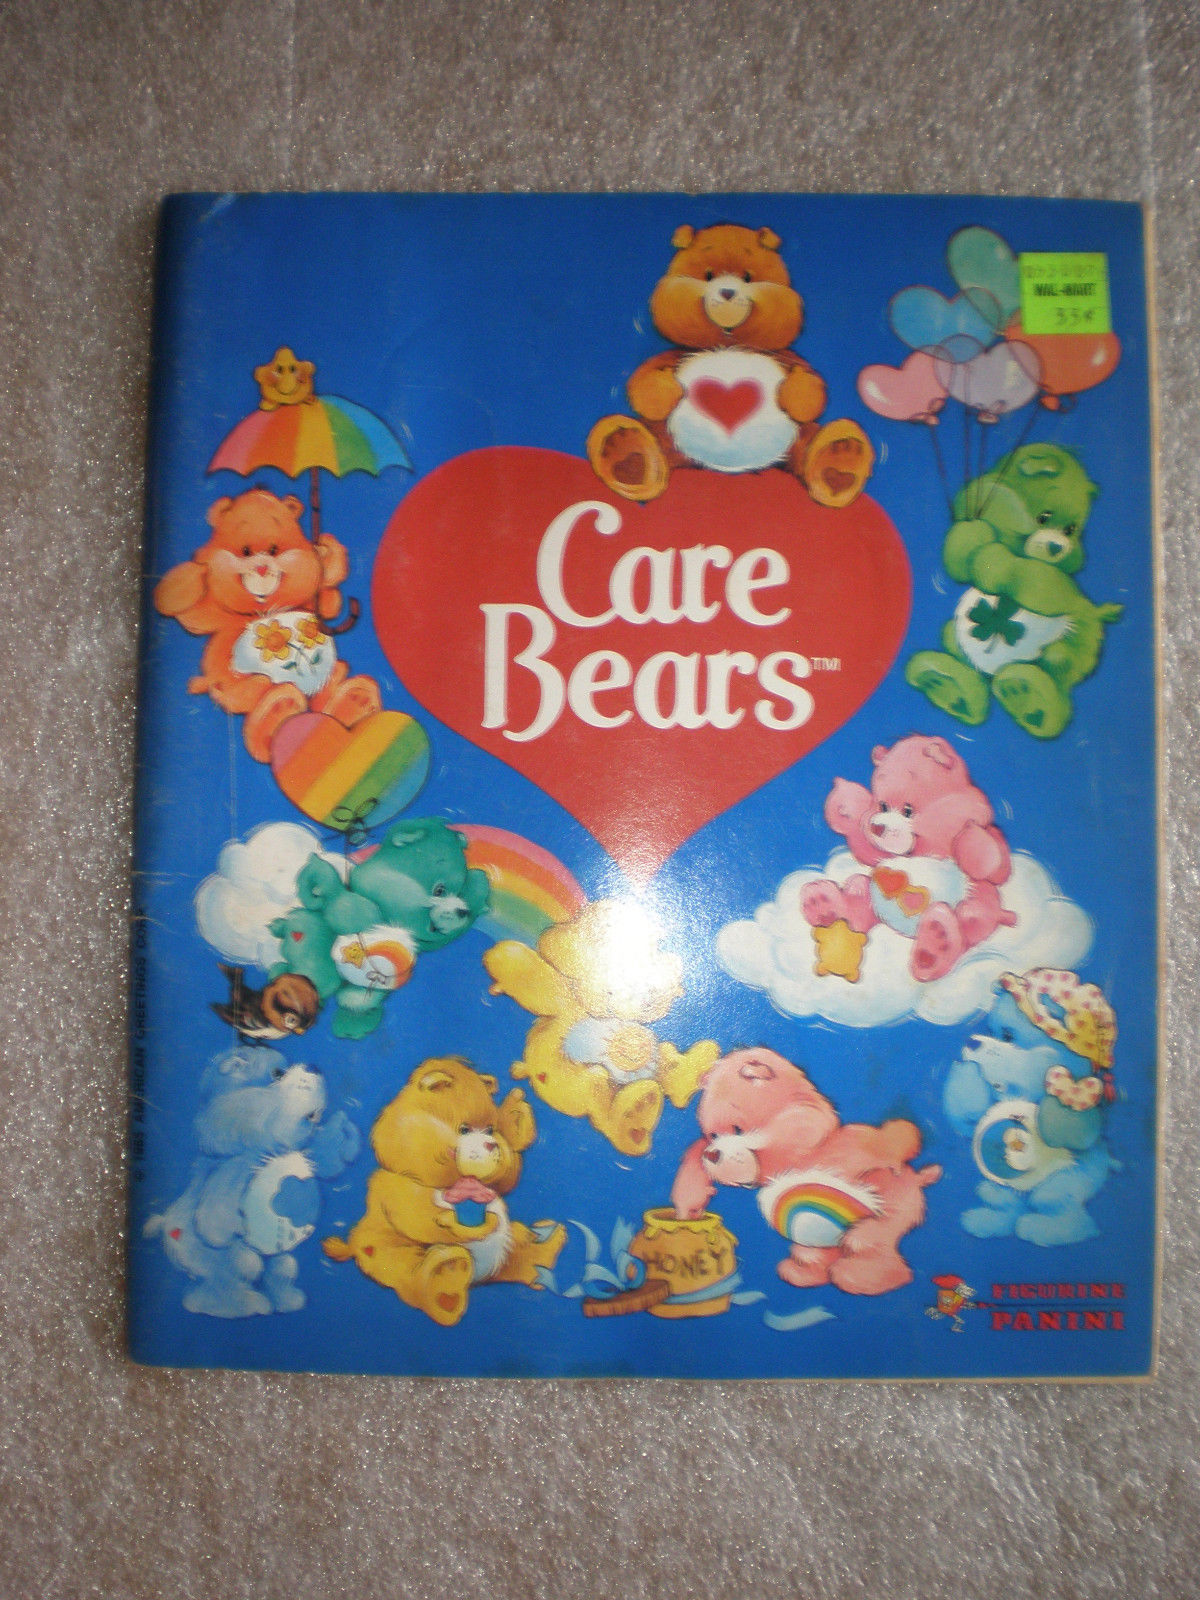 Care Bear Panini Sticker Book With All Stickers in Place Vintage Antique 1985-86